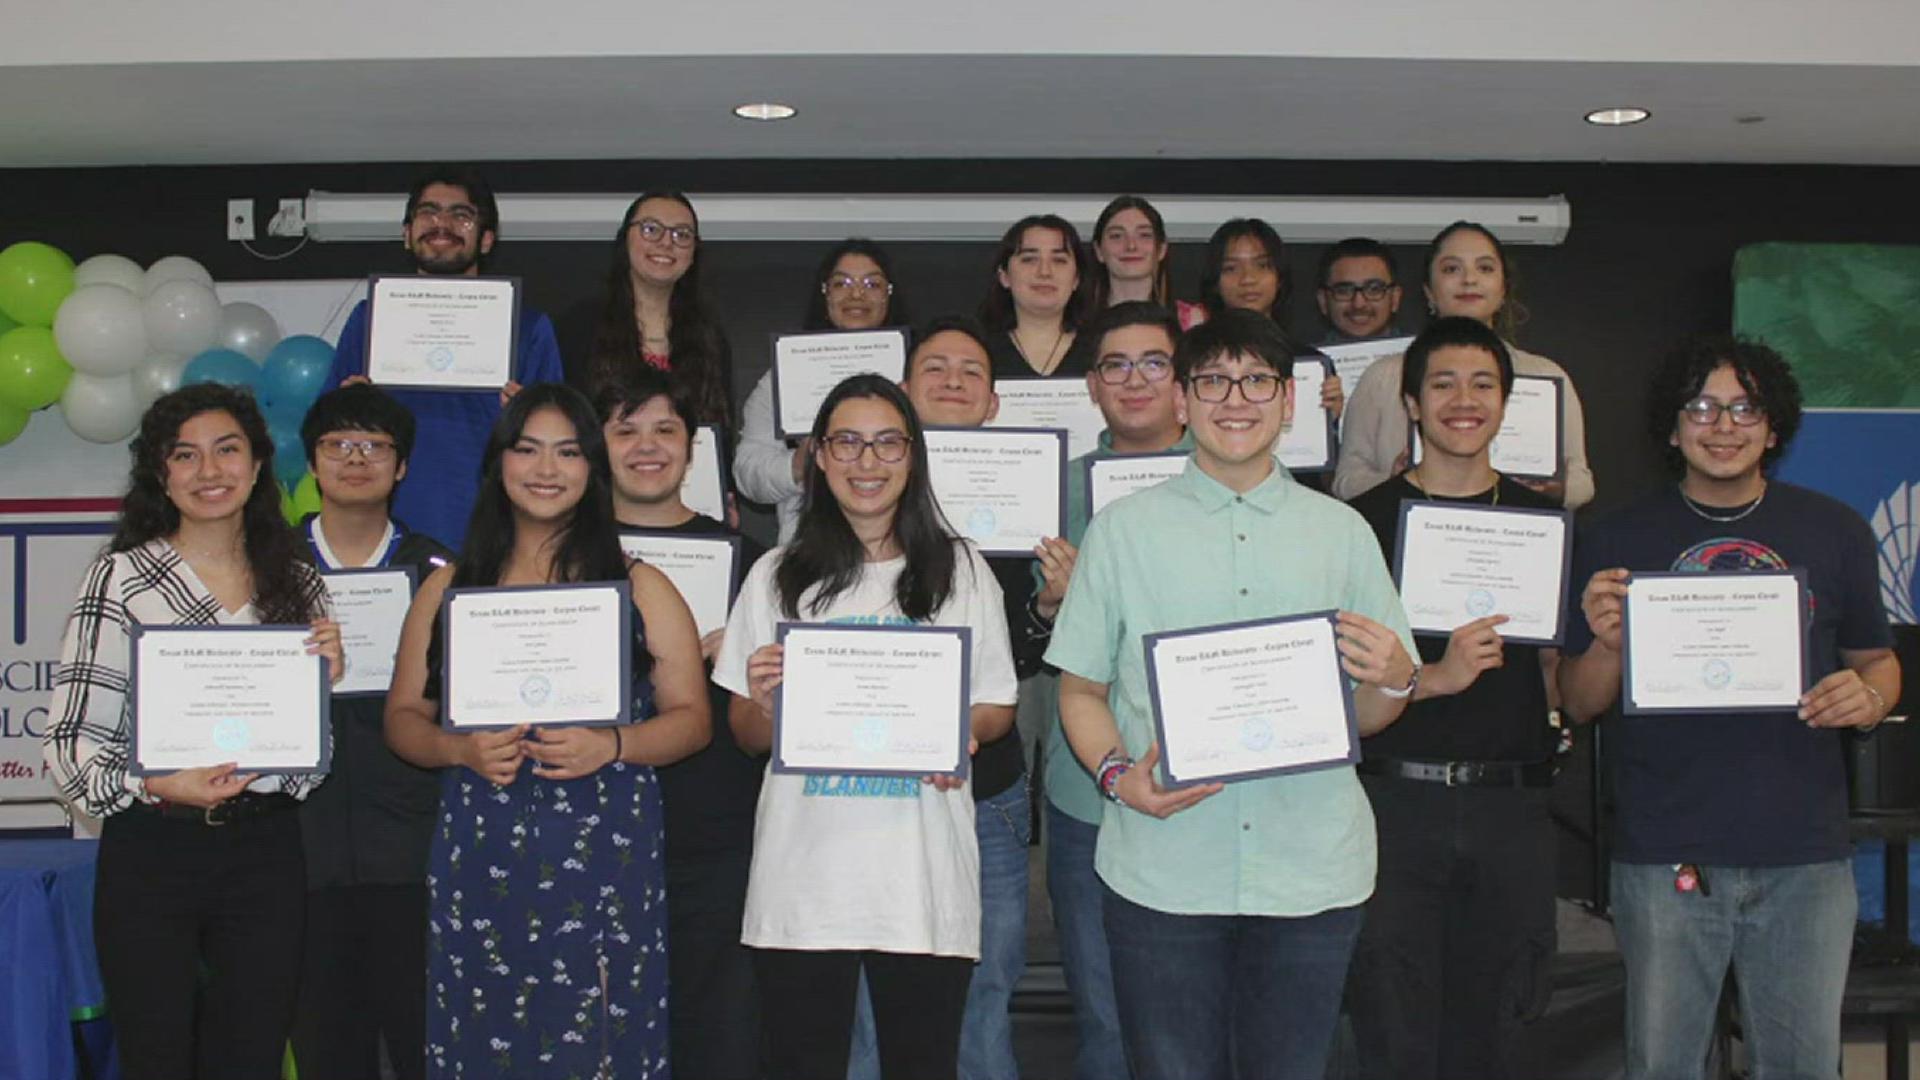 On Friday 25 students were awarded scholarships and acceptance letters to TAMU-CC!